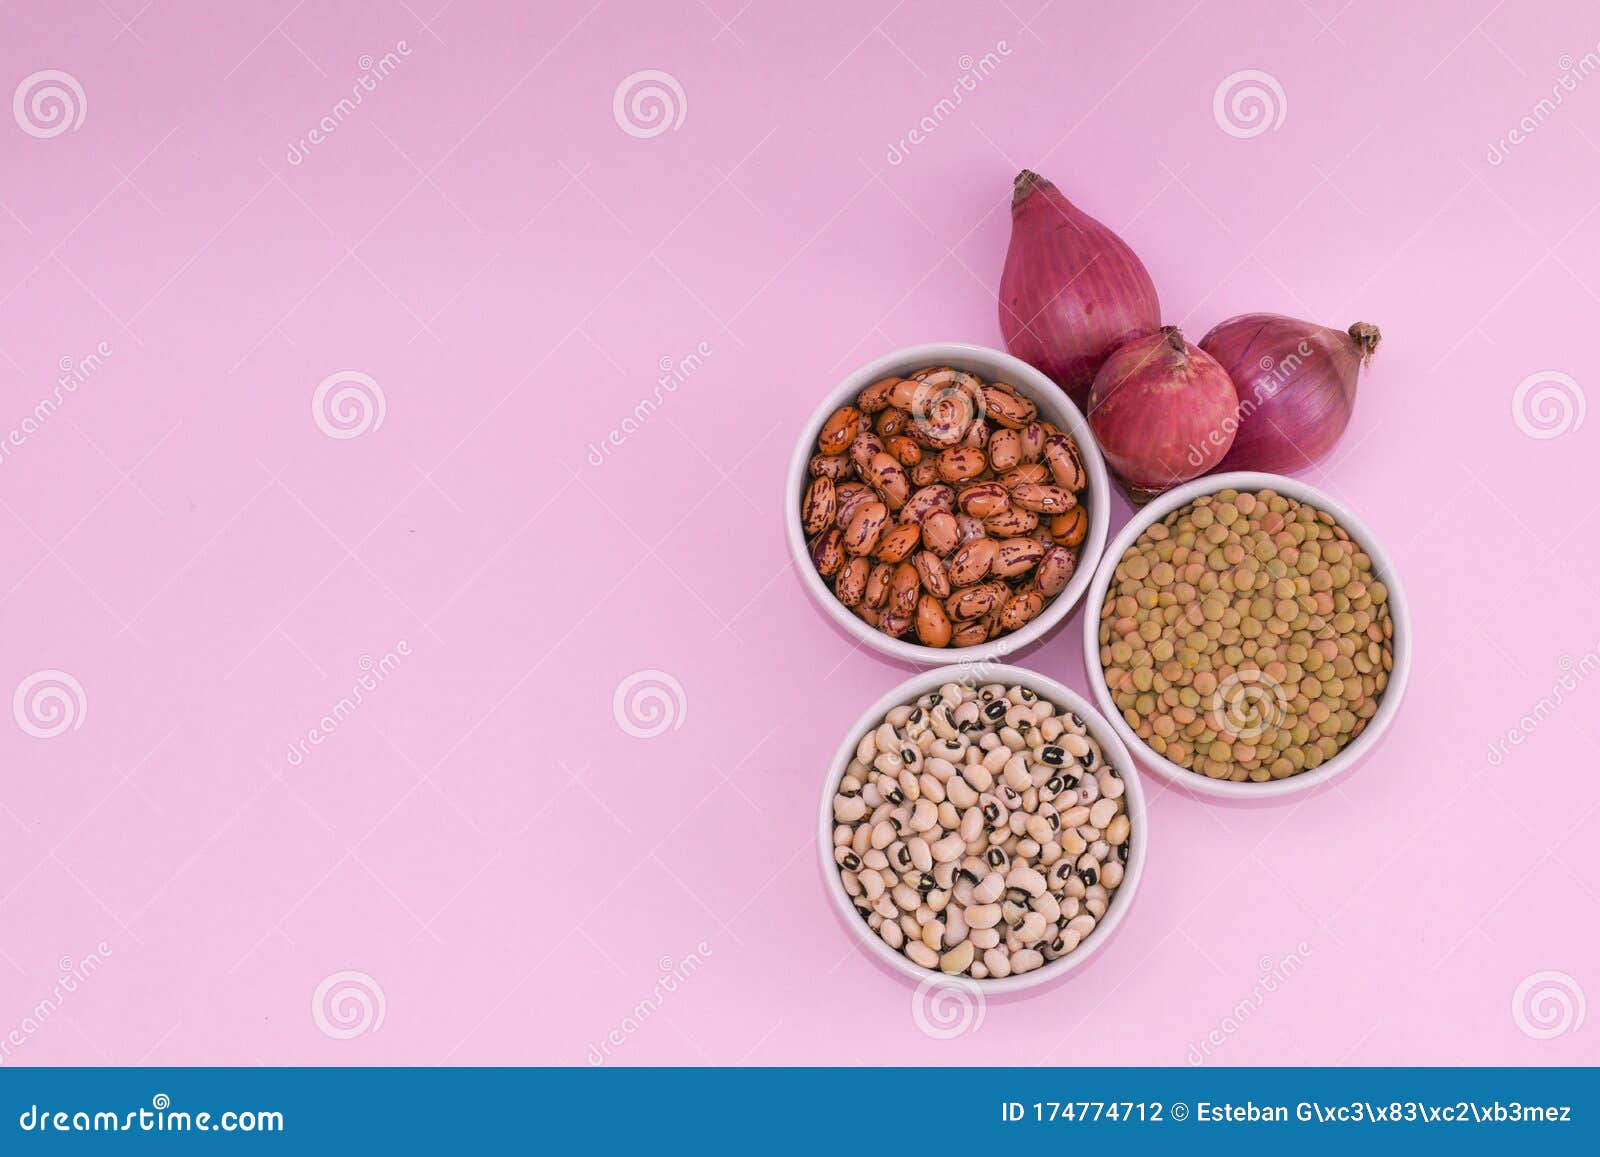 ingredients to make a vegan and vegetarian meal.  lentils and beans for healthy food.  organic legumes on pink background, onion